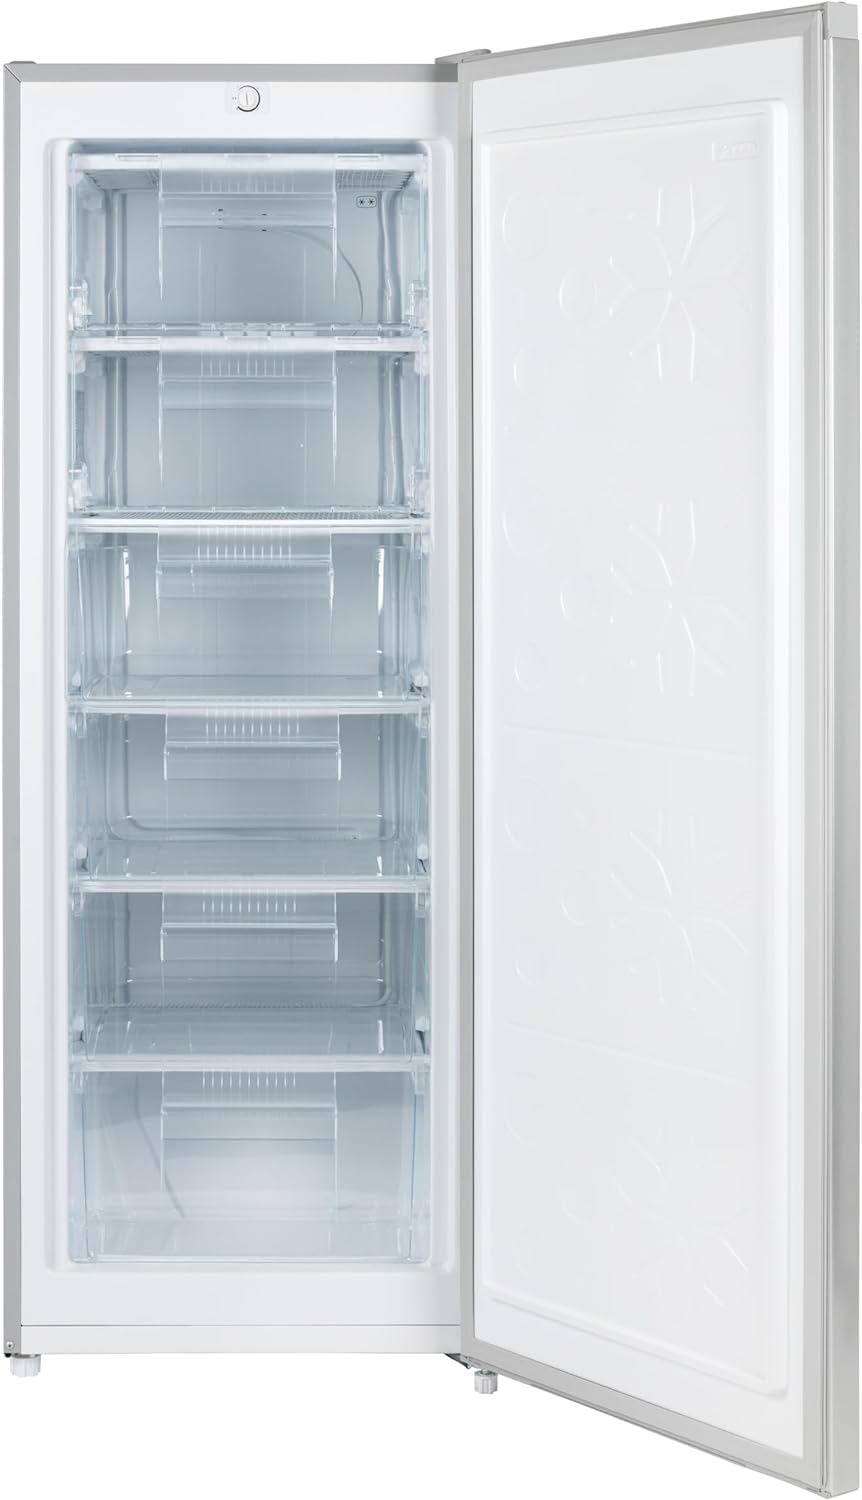 Willow WTF55S 177L Freestanding Tall Freezer with Reversible Door, Adjustable Thermostat, 2 Years Warranty - Silver - Amazing Gadgets Outlet